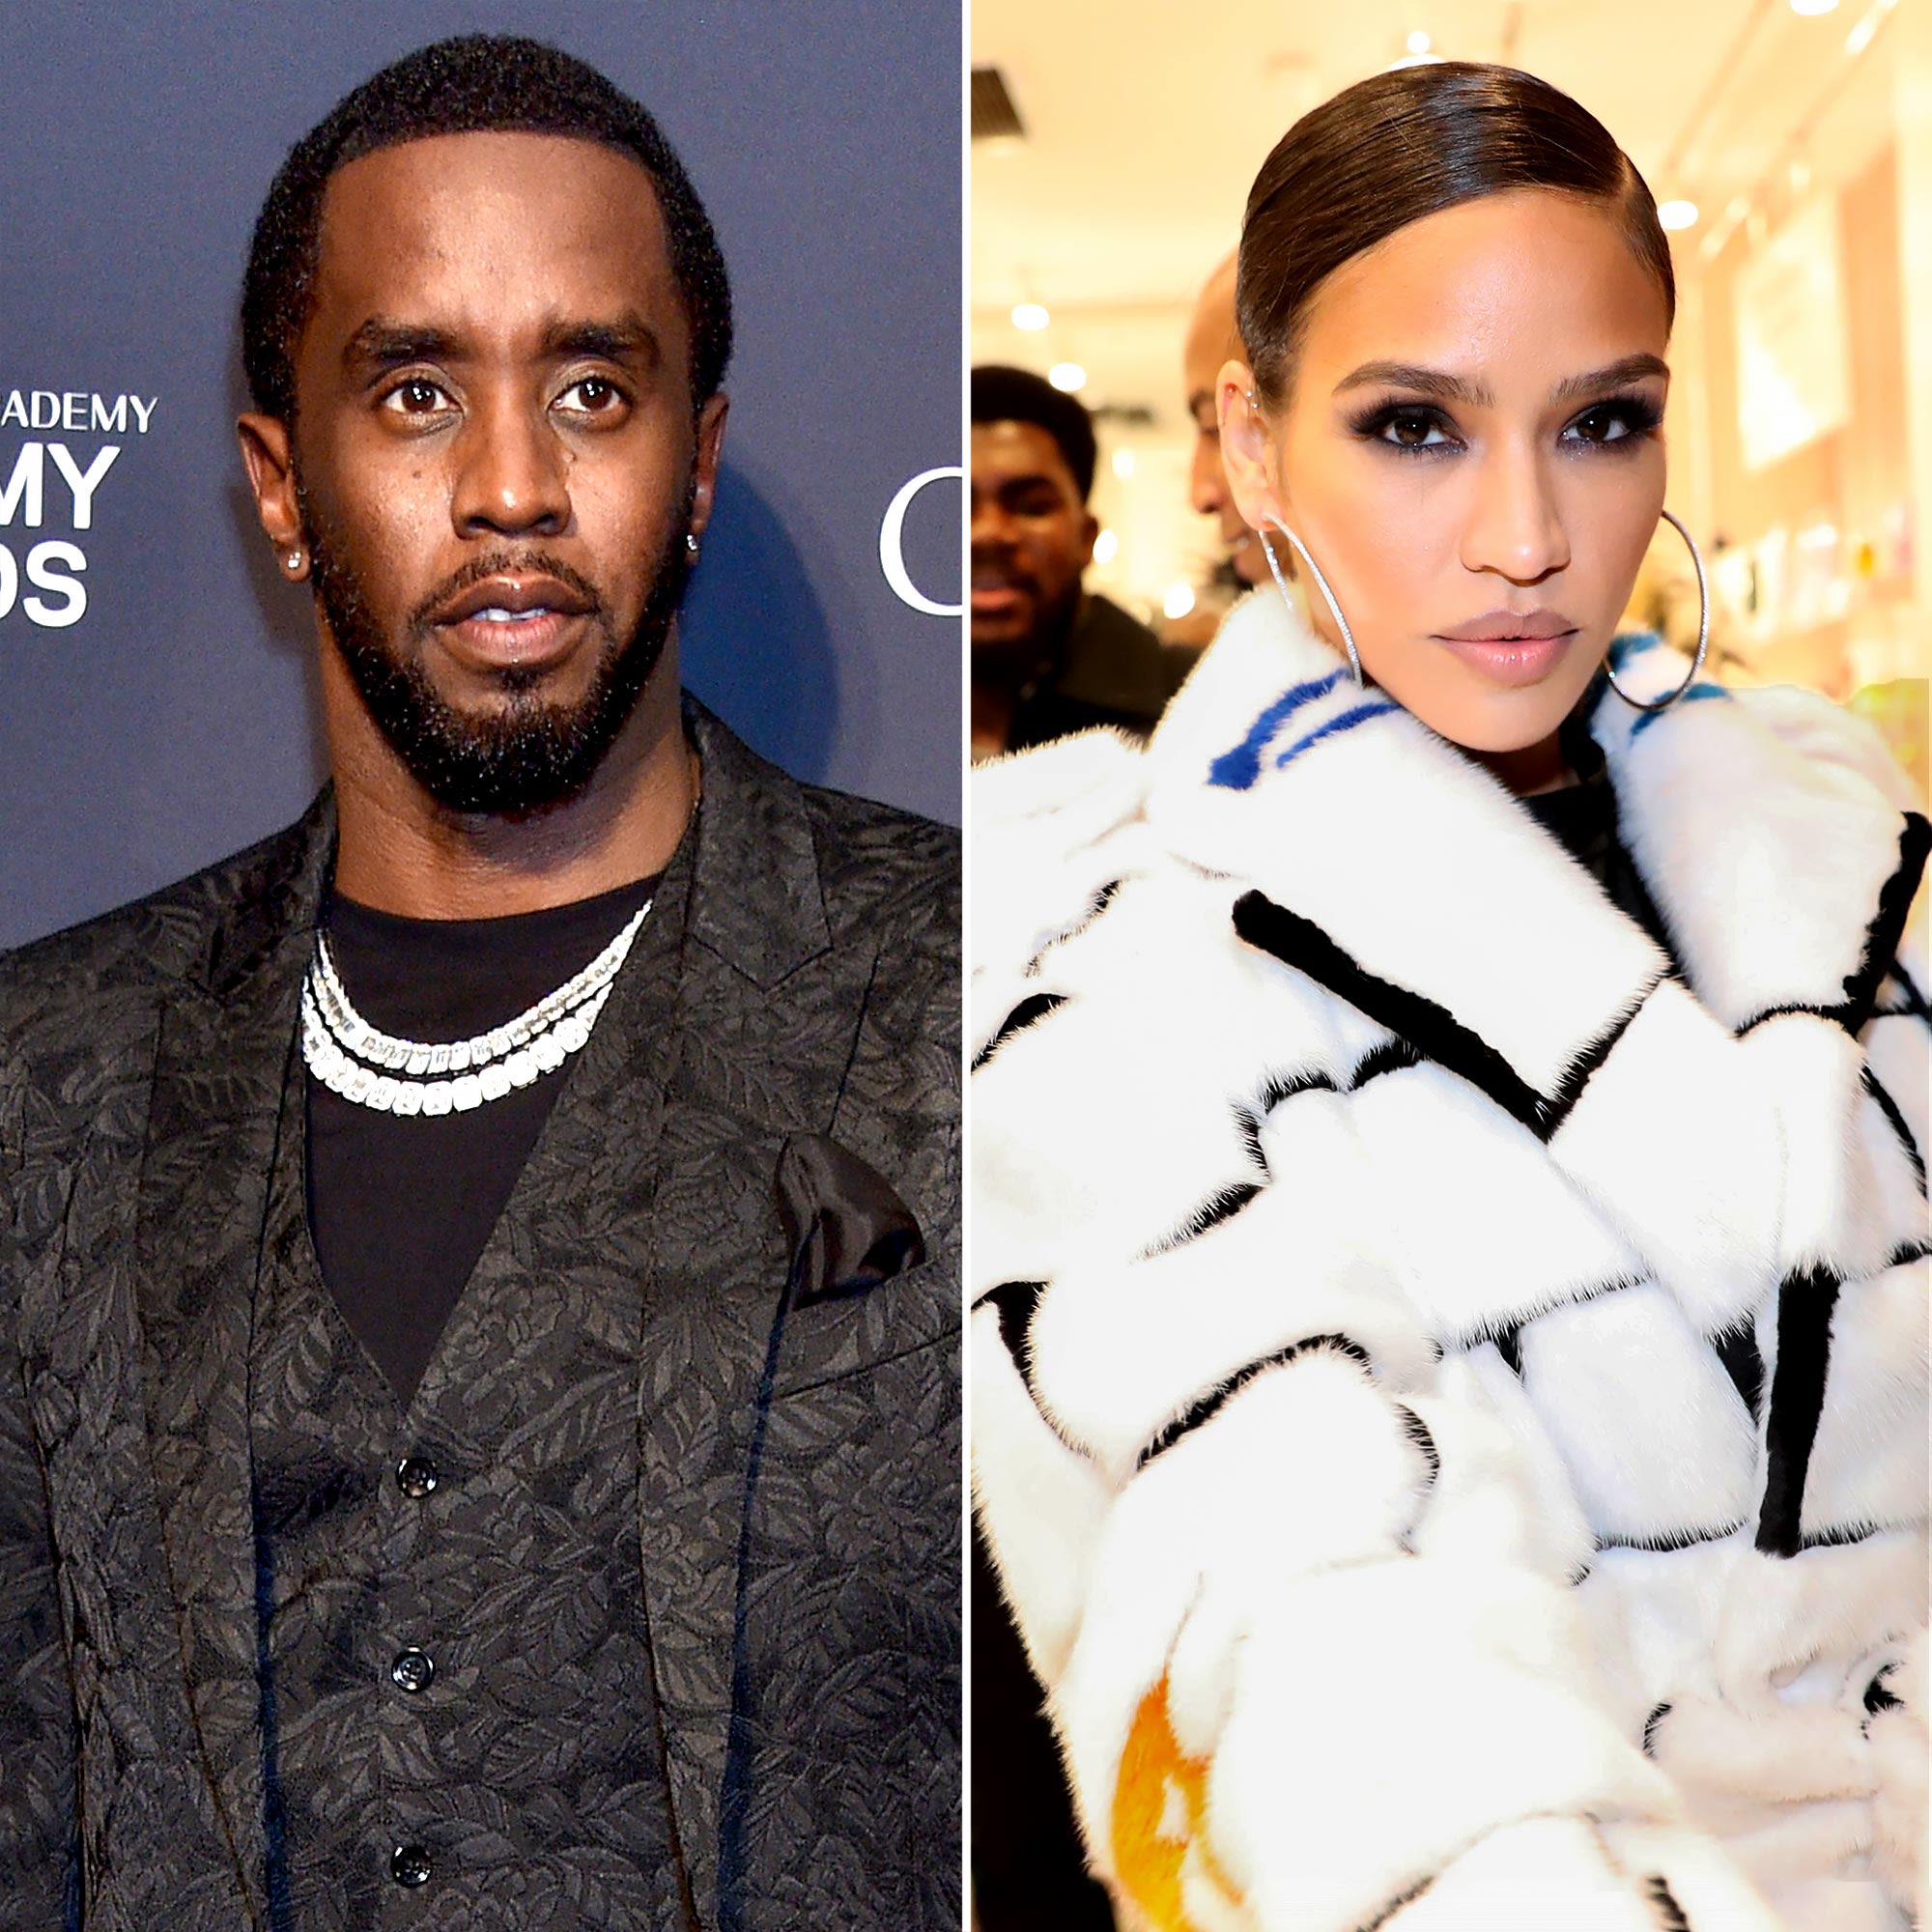 Stars React to Video of Diddy Assaulting Ex-Girlfriend Cassie